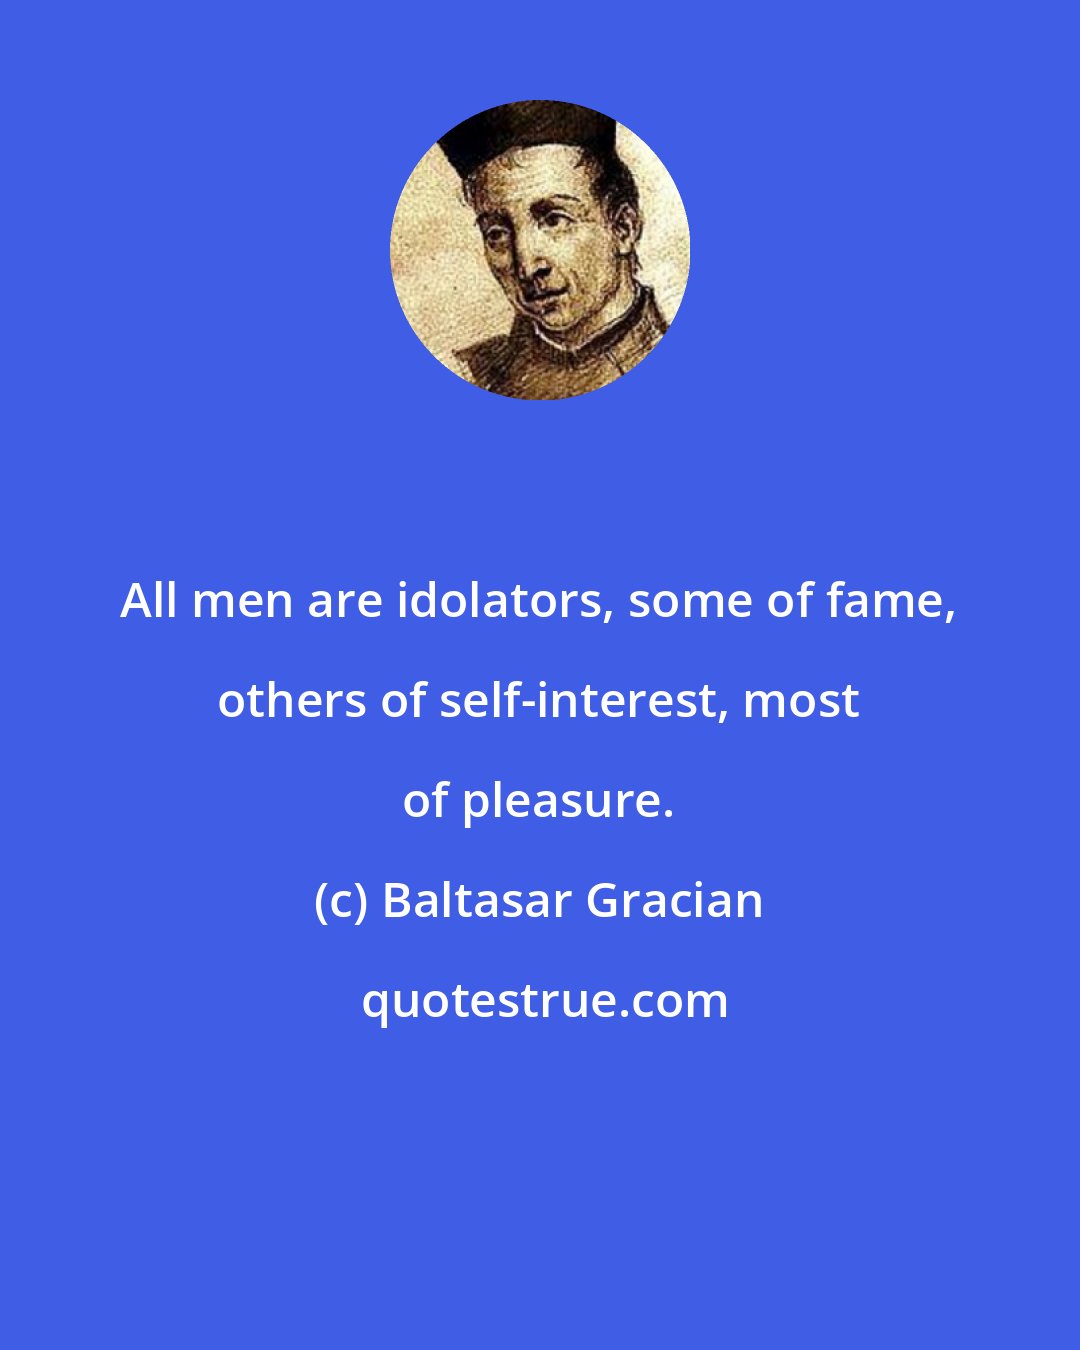 Baltasar Gracian: All men are idolators, some of fame, others of self-interest, most of pleasure.